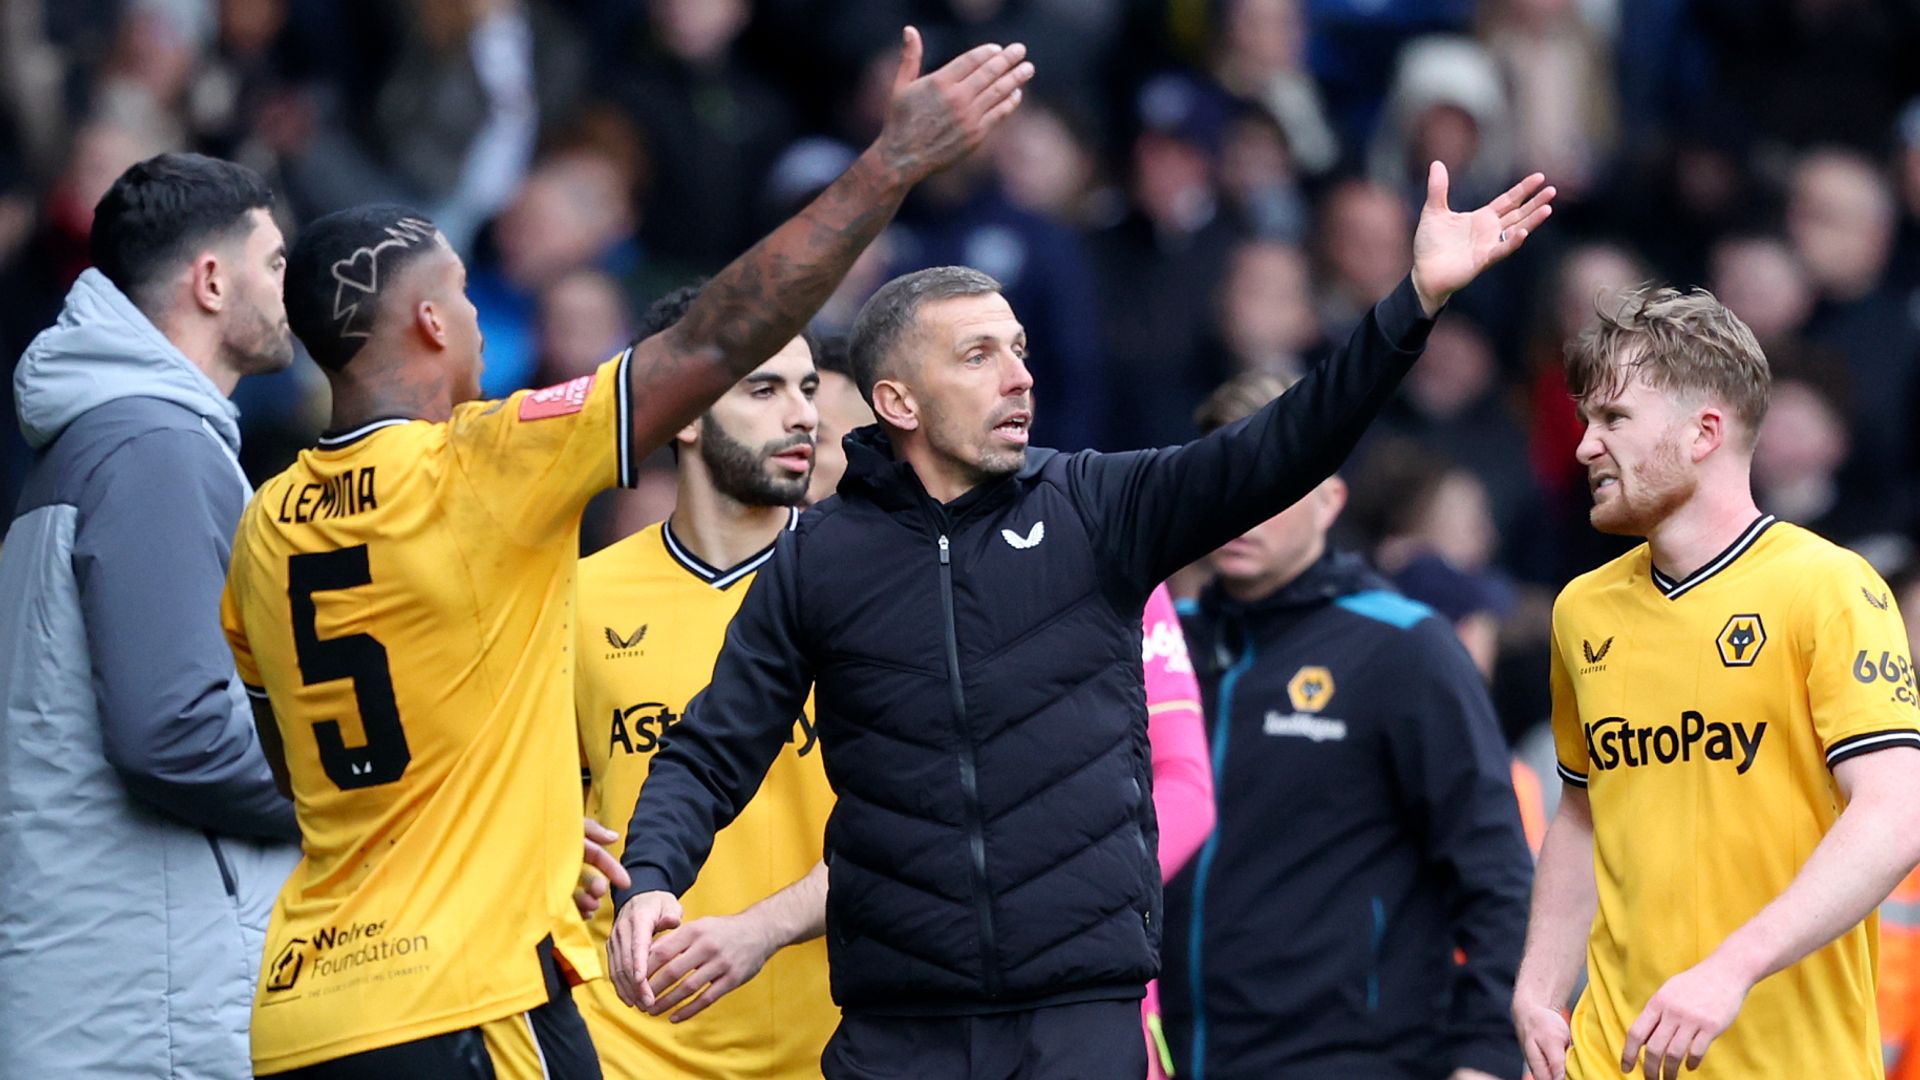 FA Cup LIVE! Match suspended due to crowd trouble as Wolves lead West Brom